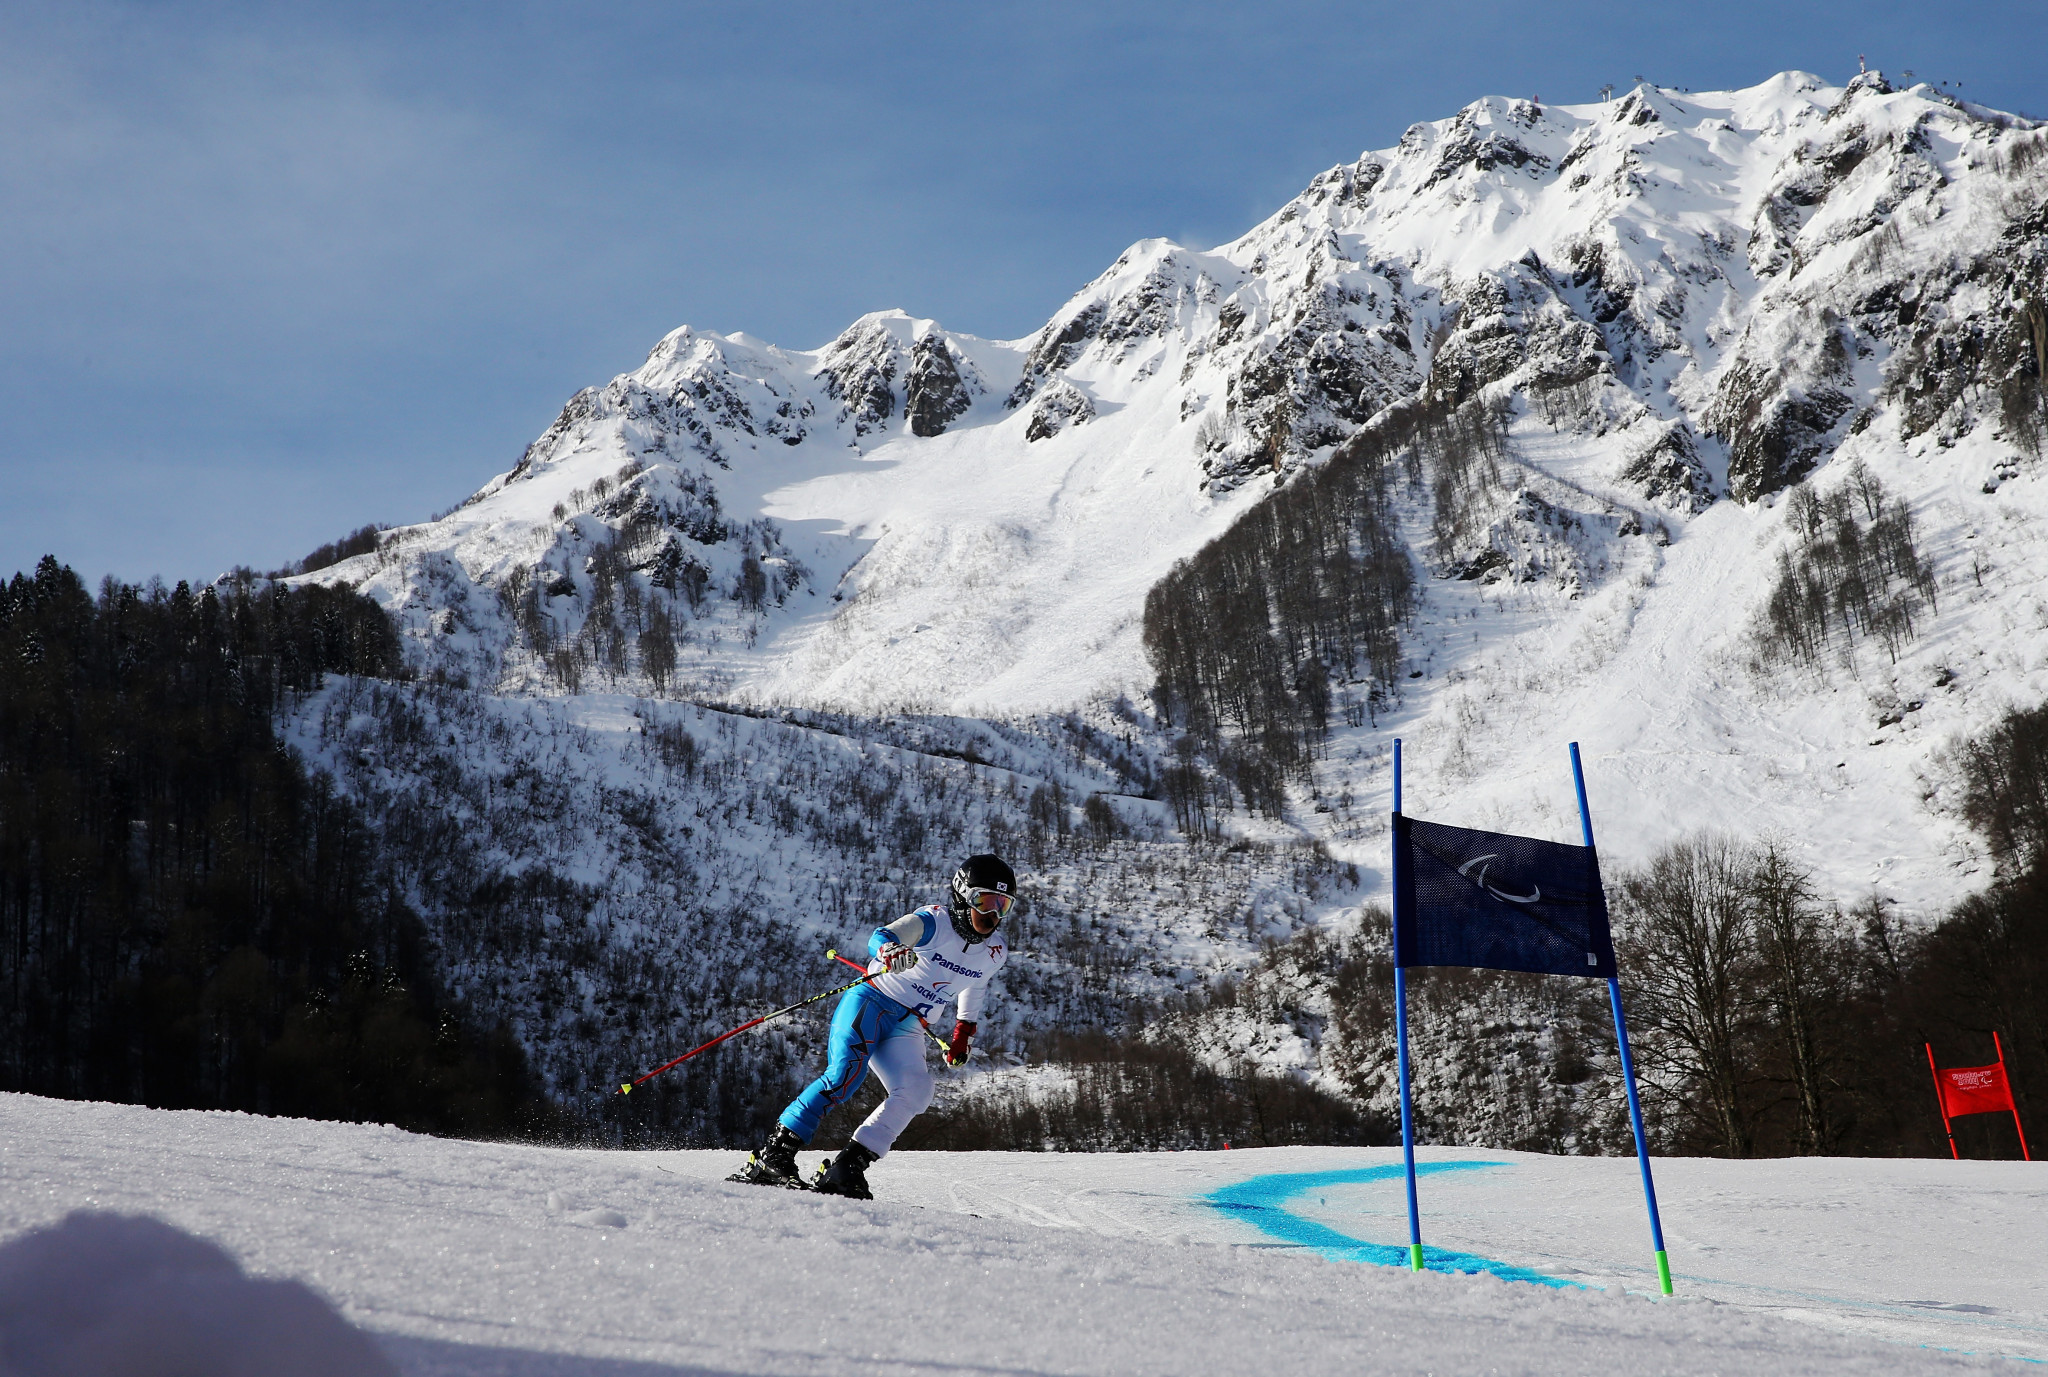 Yang Jae Rim finished fourth in the visually impaired giant slalom at Sochi 2014 - South Korea's best performance of the Winter Paralympic Games ©Getty Images